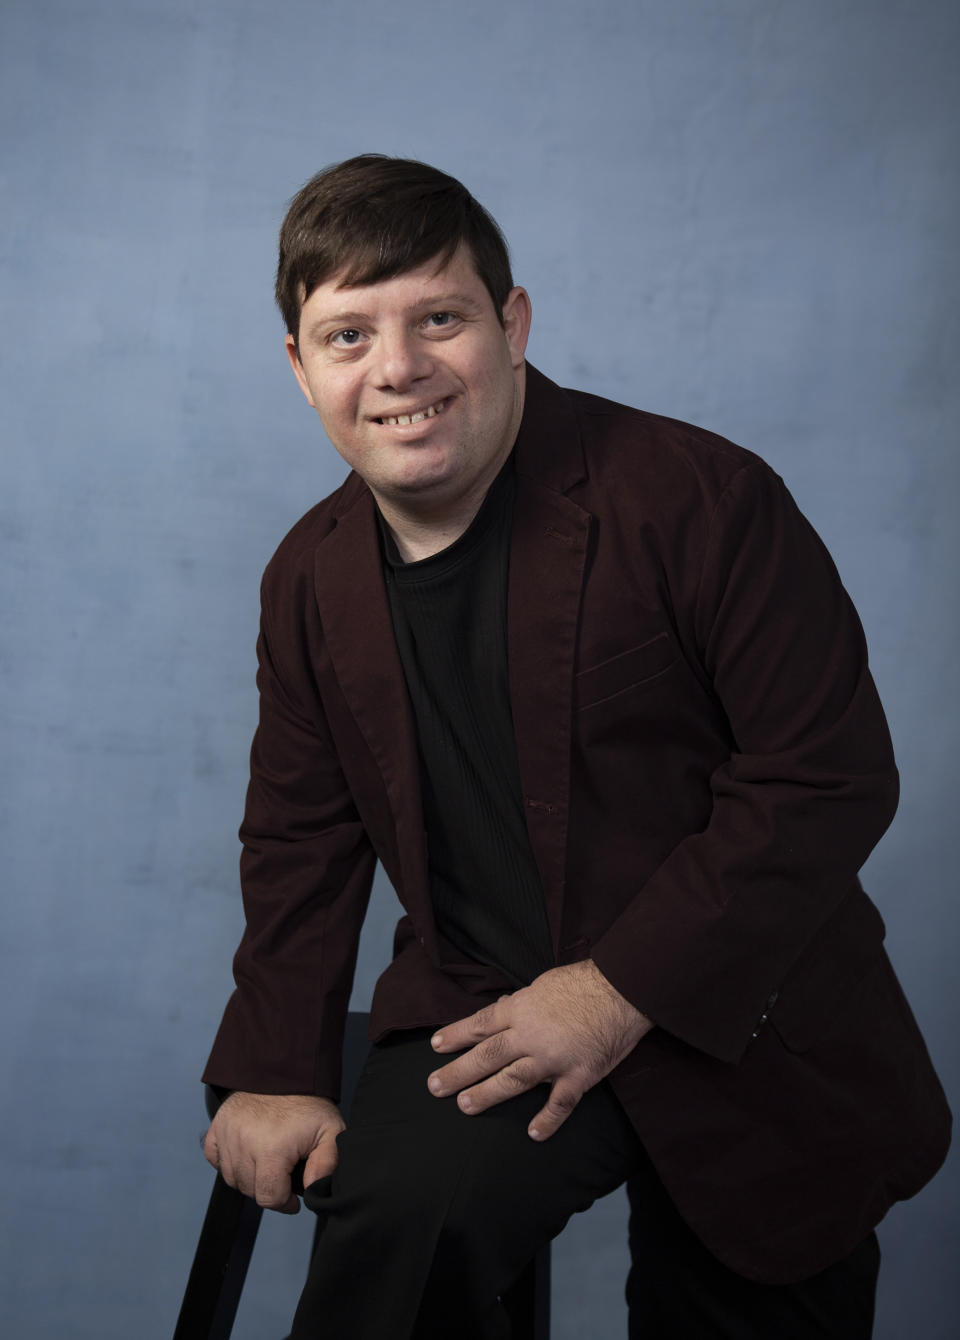 In this Dec. 5, 2019, photo Zack Gottsagen poses for a portrait in Los Angeles. Gottsagen was named one of The Associated Press’ Breakthrough Entertainers of 2019. (Photo by Rebeca Cabage/Invision/AP)